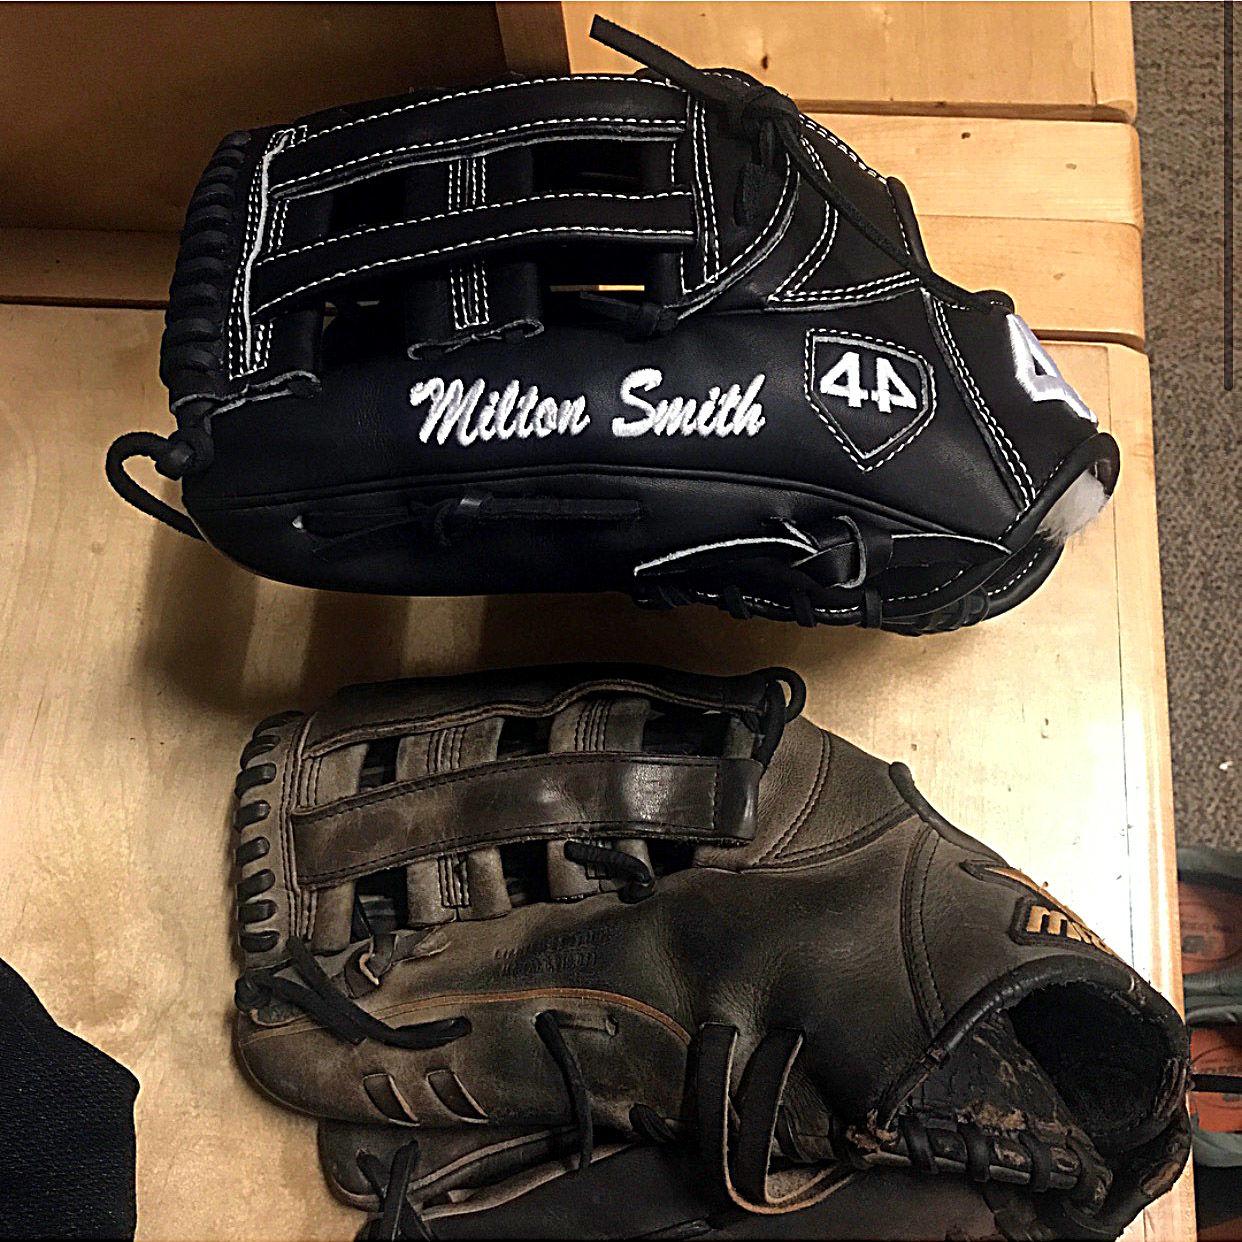 A glove story: Baseball players and their mitts